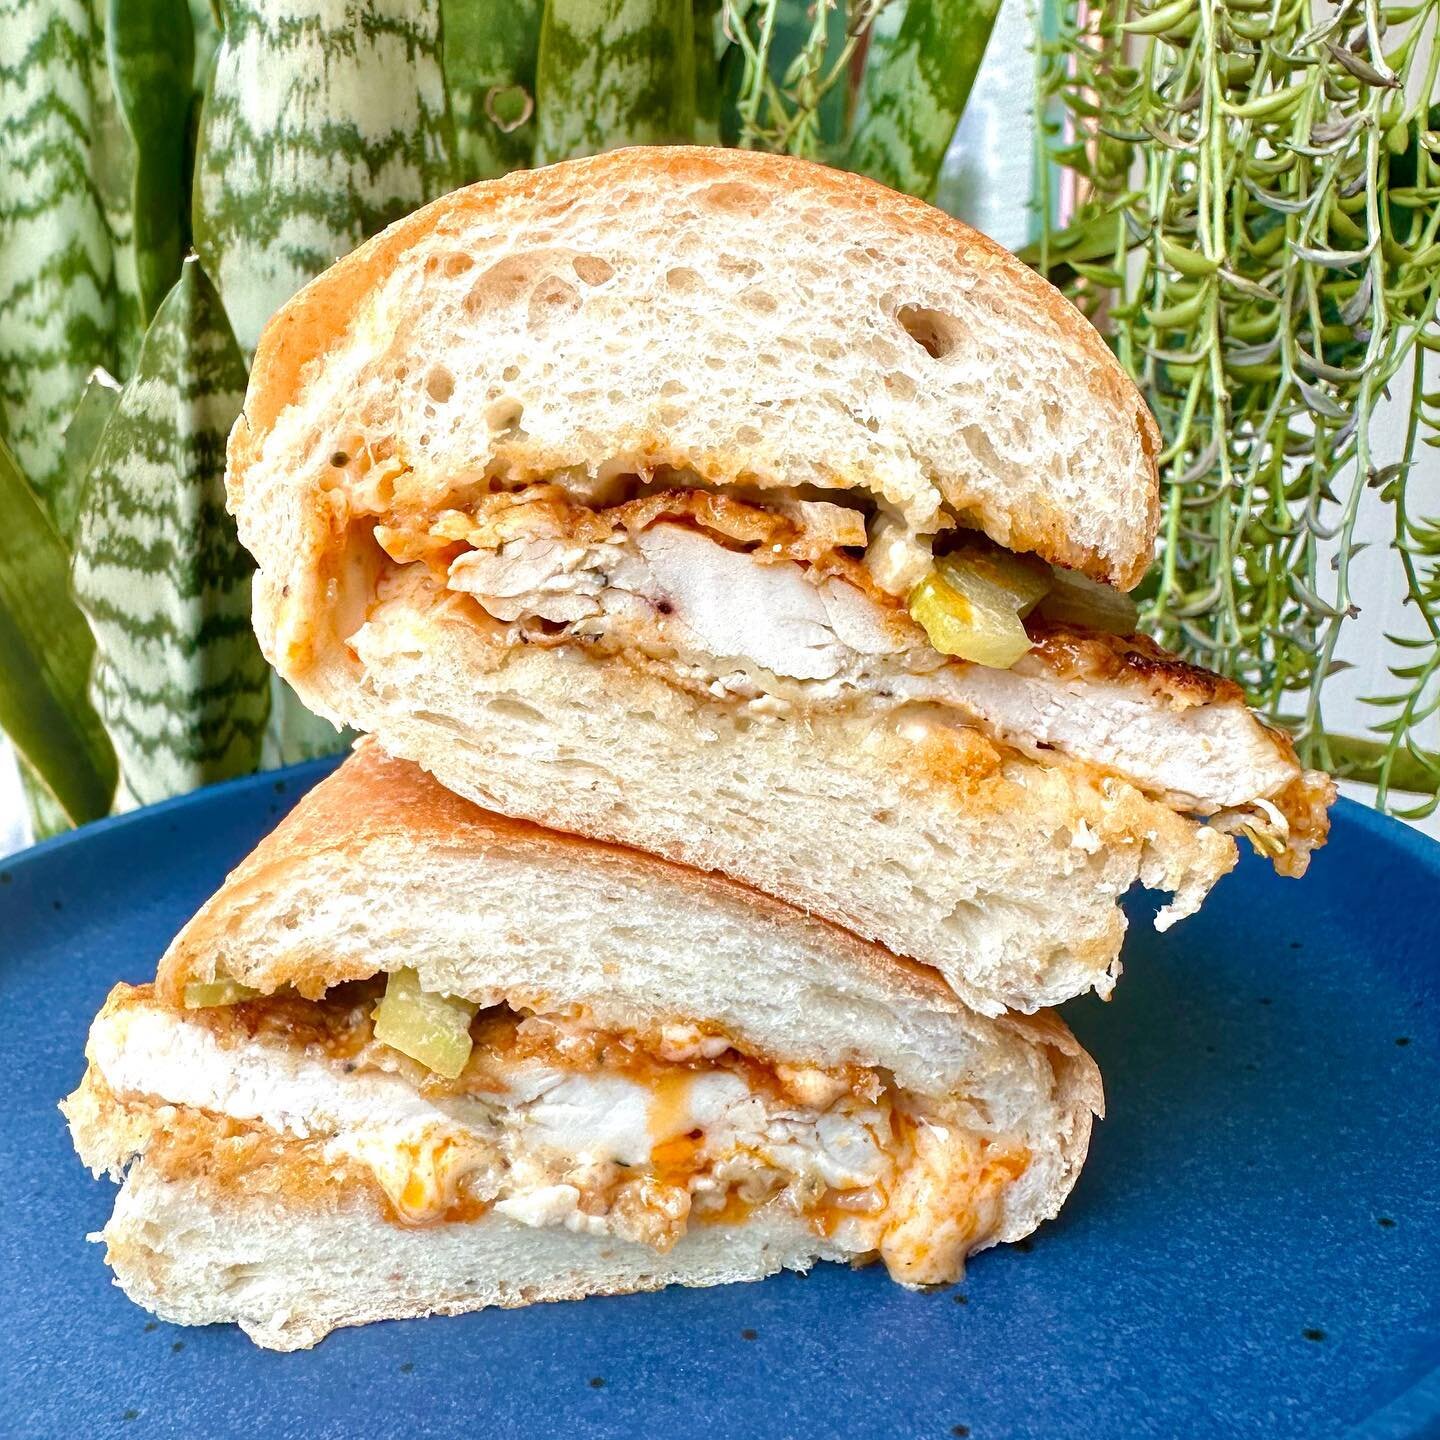 IT&rsquo;S SHORTY THURSDAY YA&rsquo;LL!!

Buffalo Chicken Shorty

Local chicken breast dipped in hot sauce, blue cheese mayo, shaved celery on a homemade soft roll

#mariasbreadsandwiches #shortythursday #lunch #collingswood #itswhereyouwanttobe